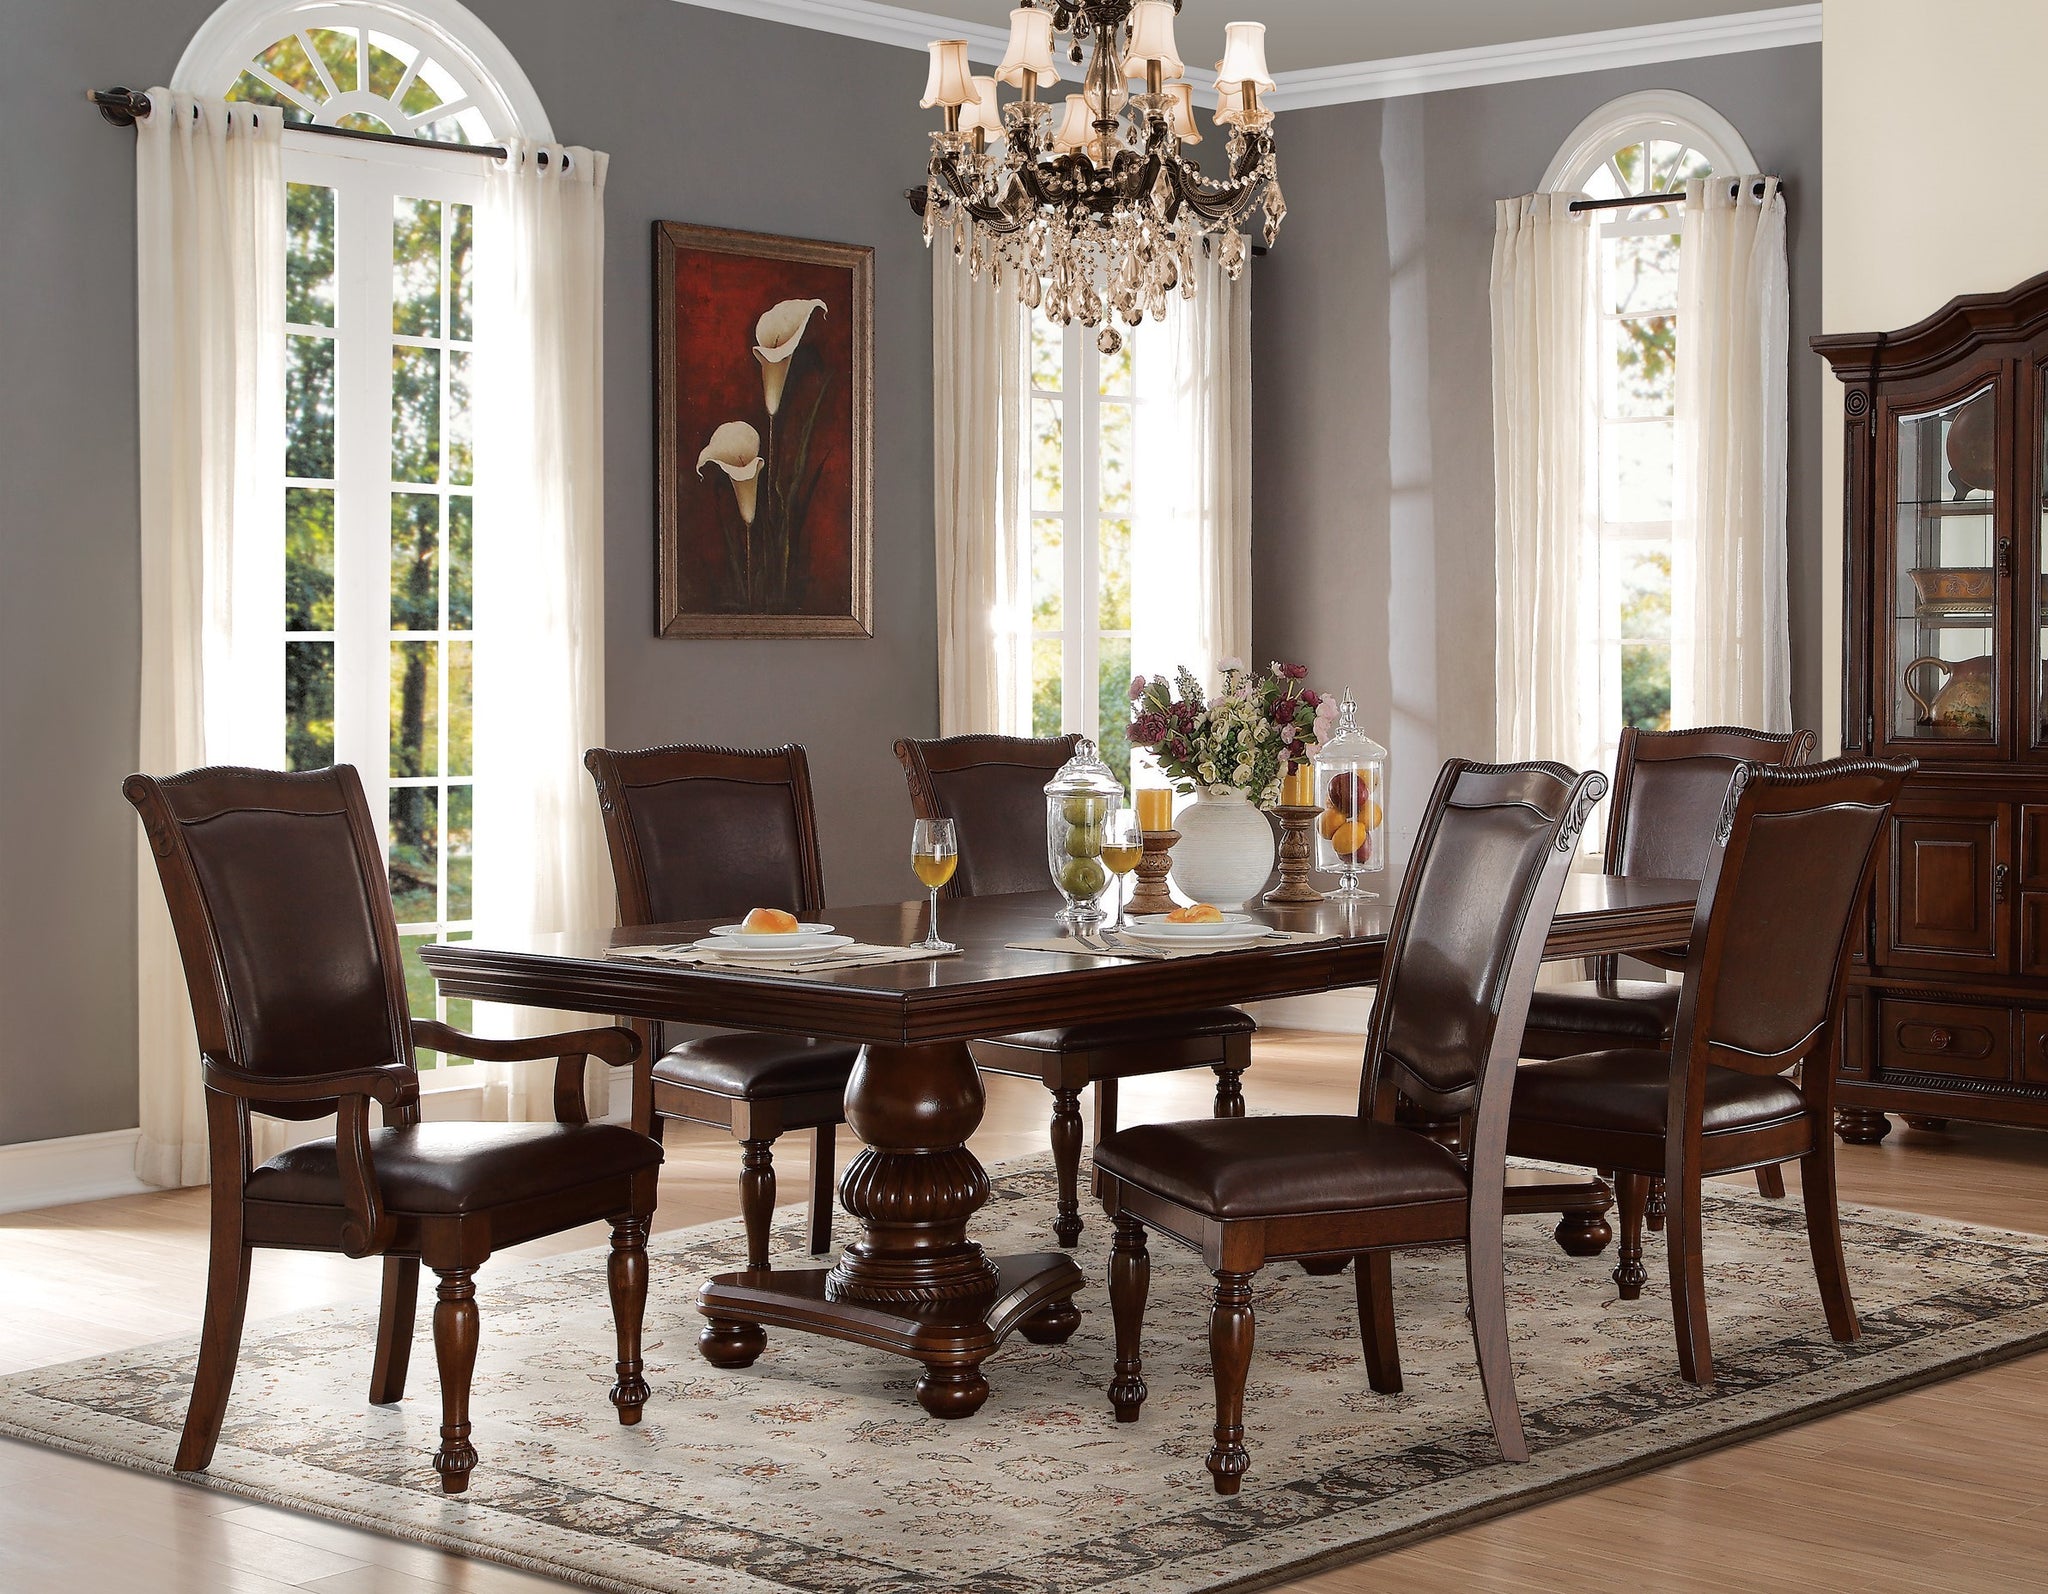 Traditional Style Dining Room Table w Leaf 2x wood-wood-brown mix-seats 6-wood-dining